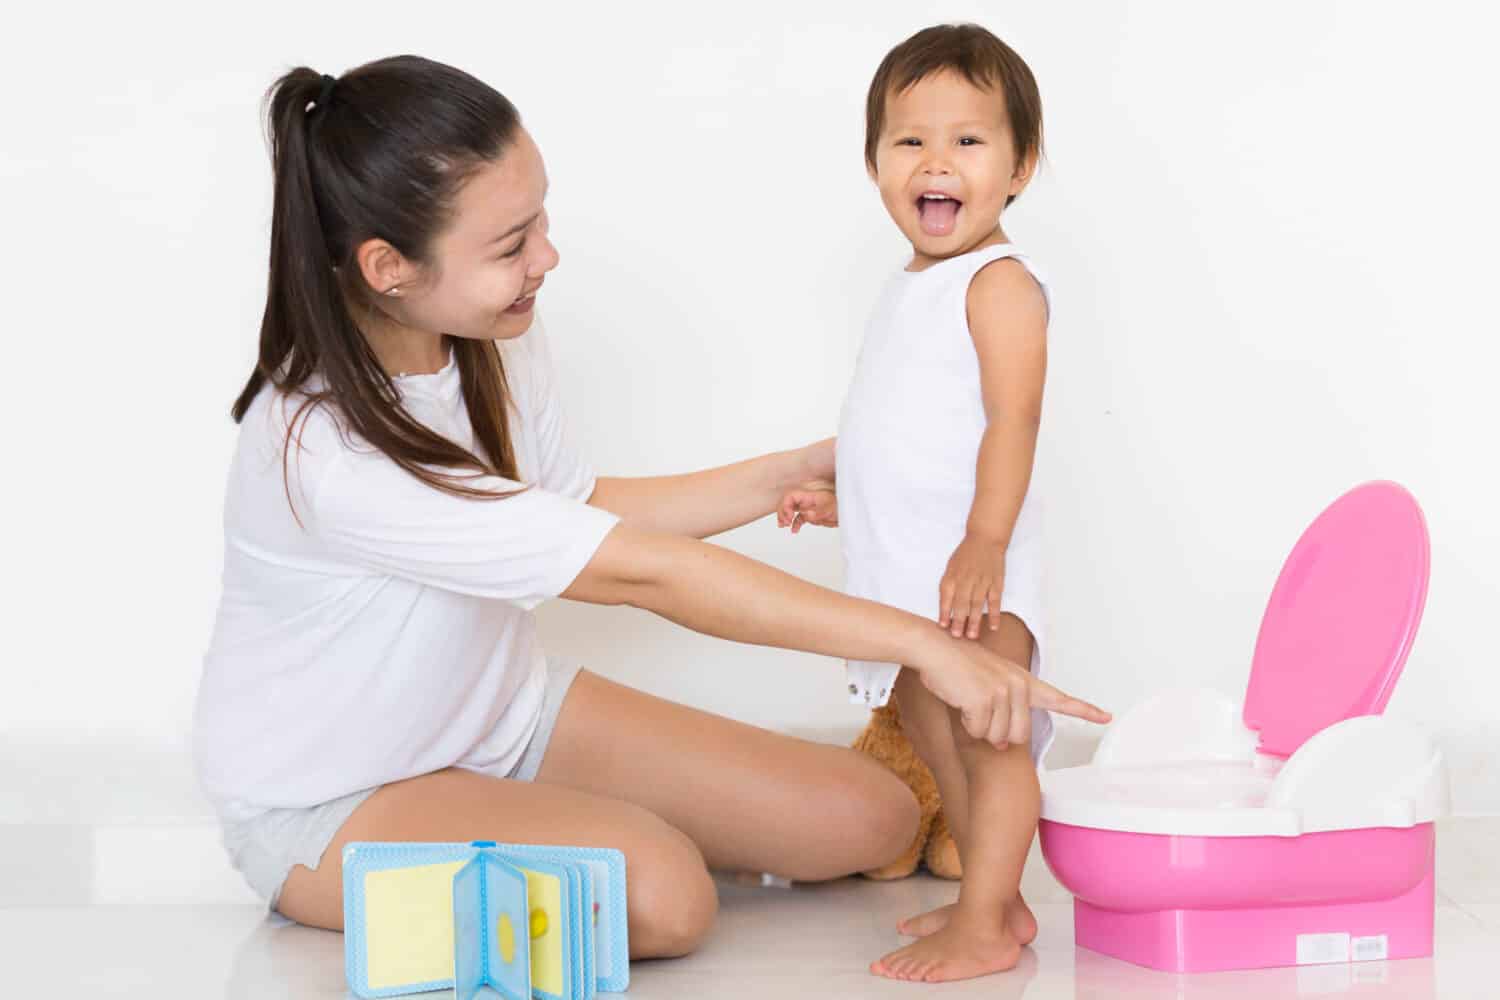 Mother pointing at potty, child happy at succeeding